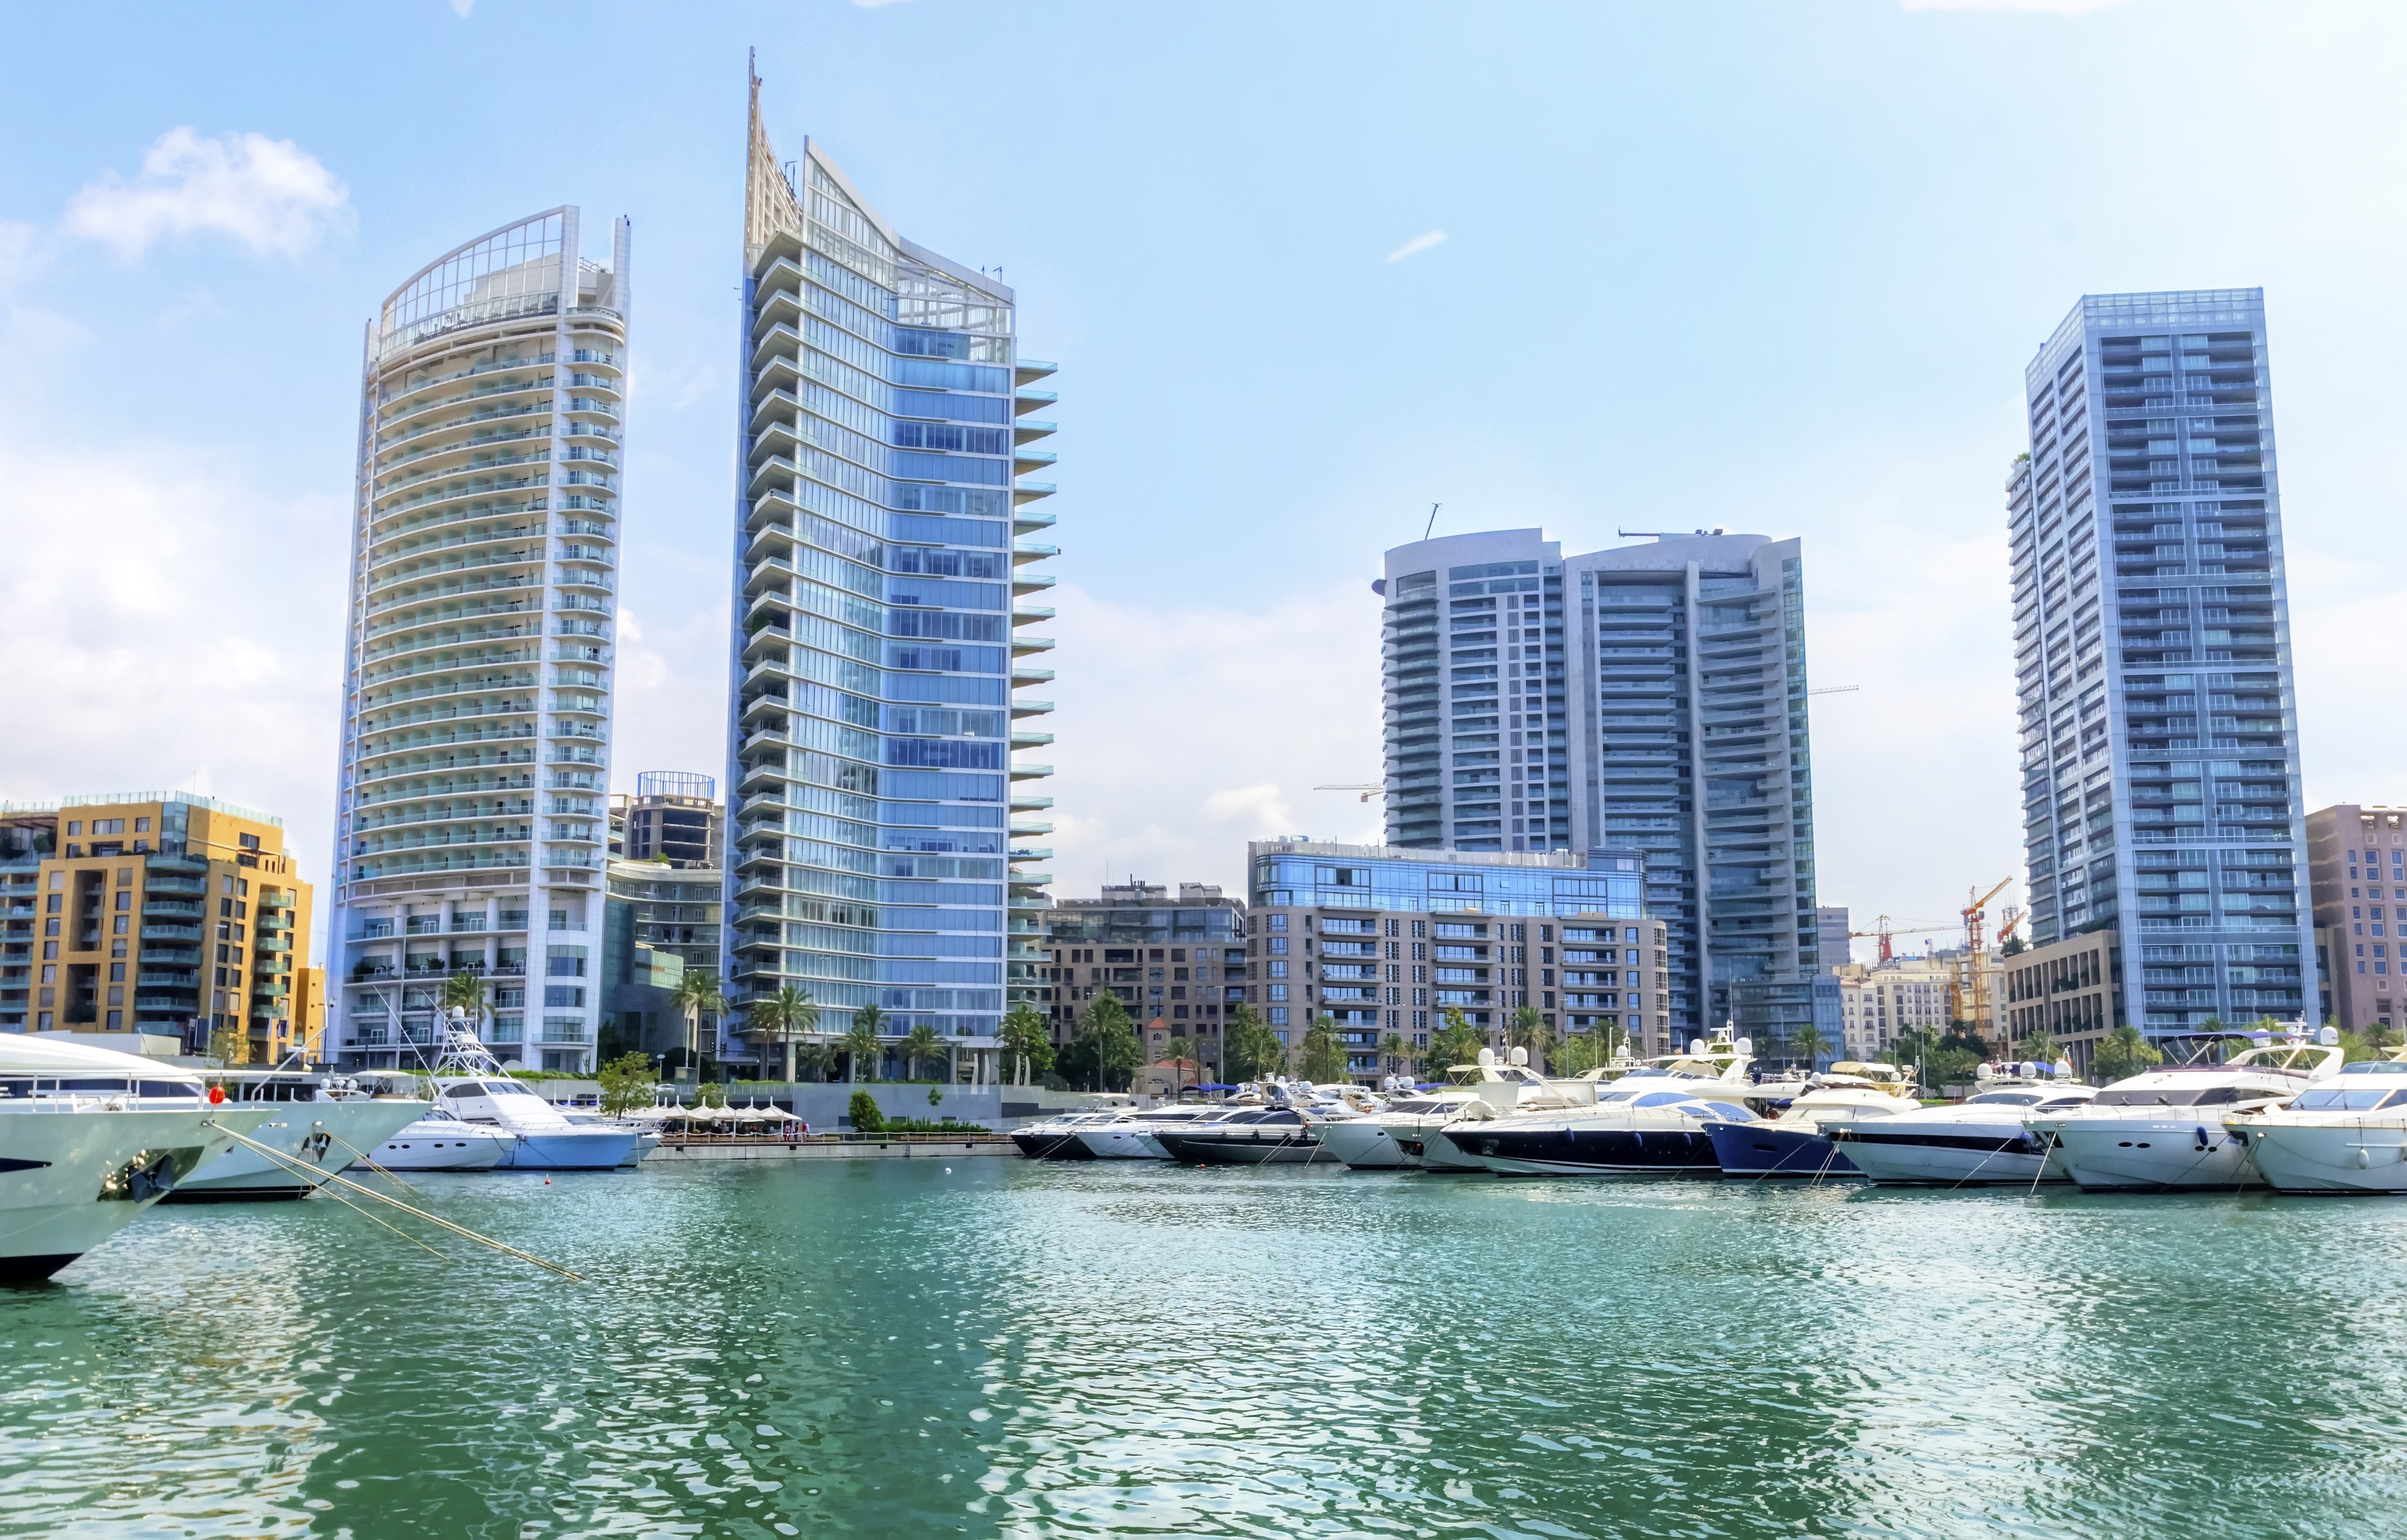 What to see in Beirut?